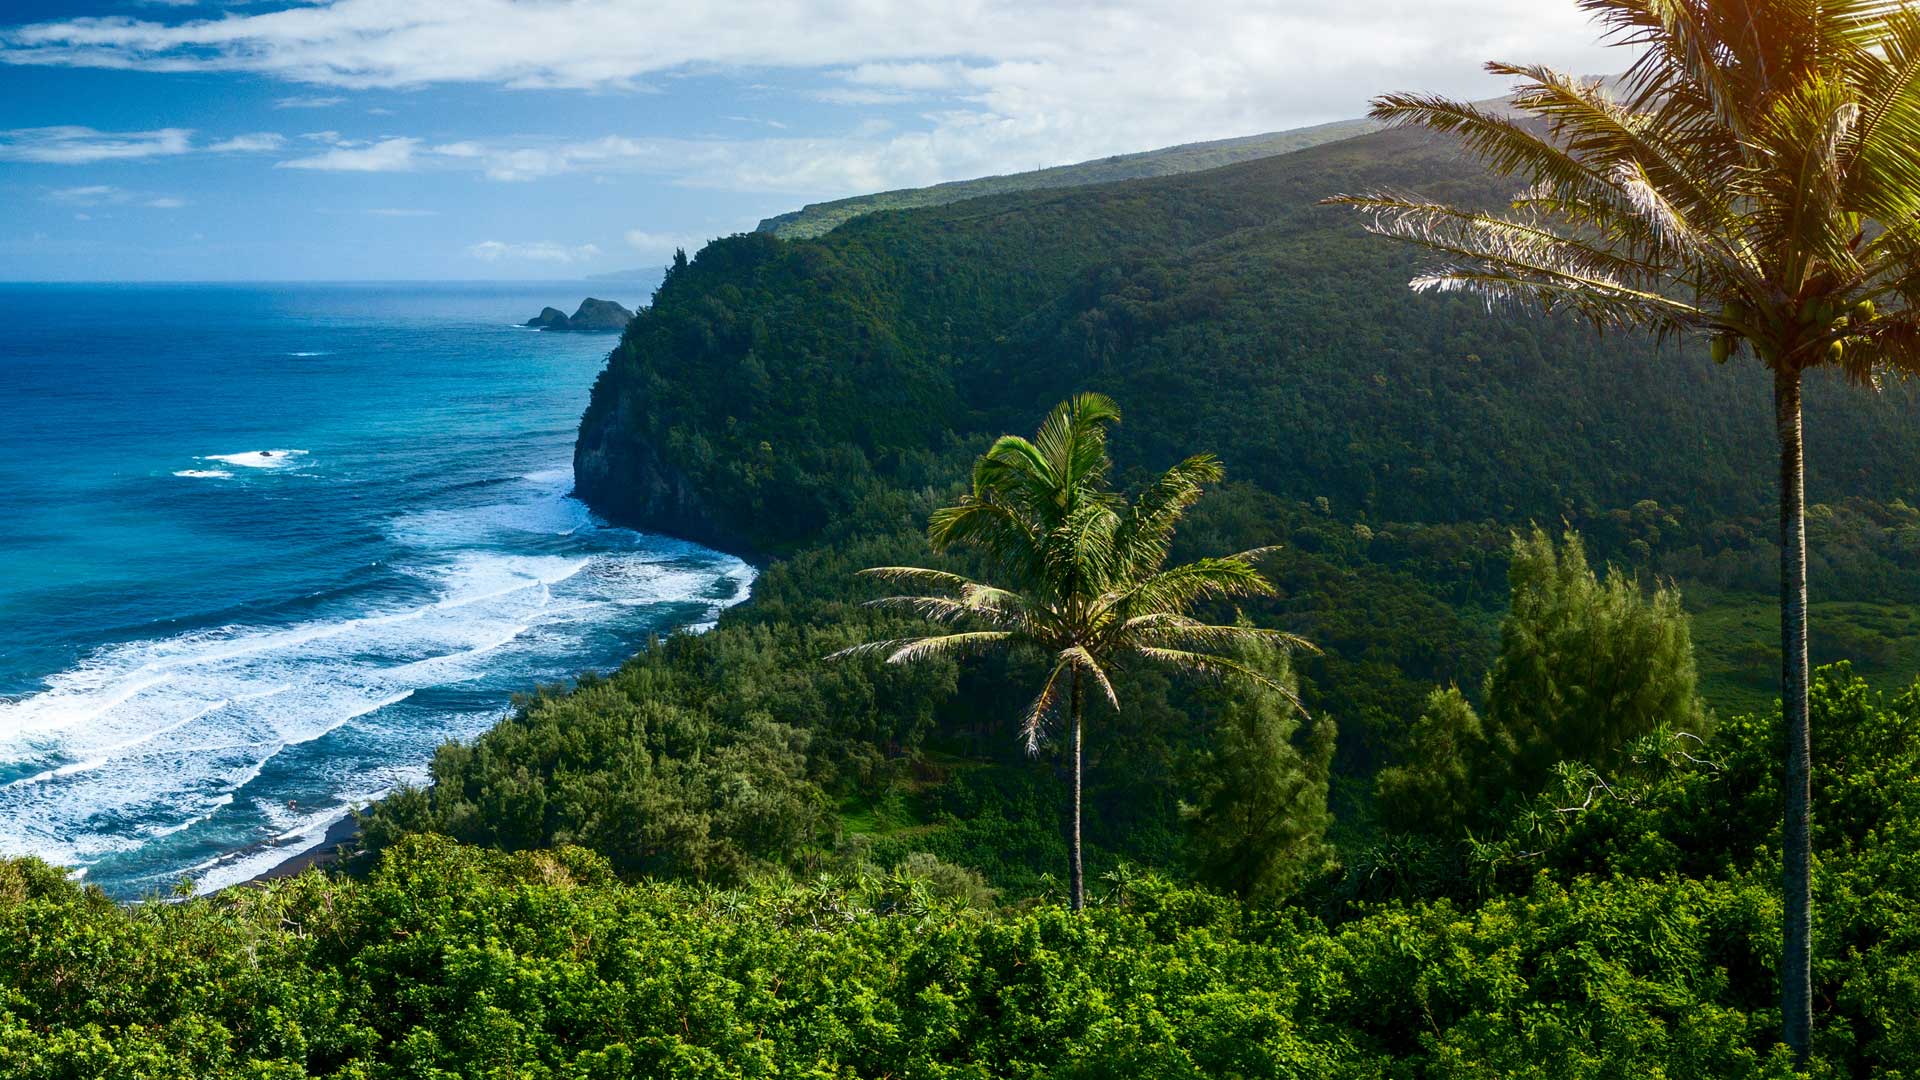 Landscape image of mountain cliffs filled with green terrain and palm trees next to a bright blue ocean and crashing waves with blue sky.